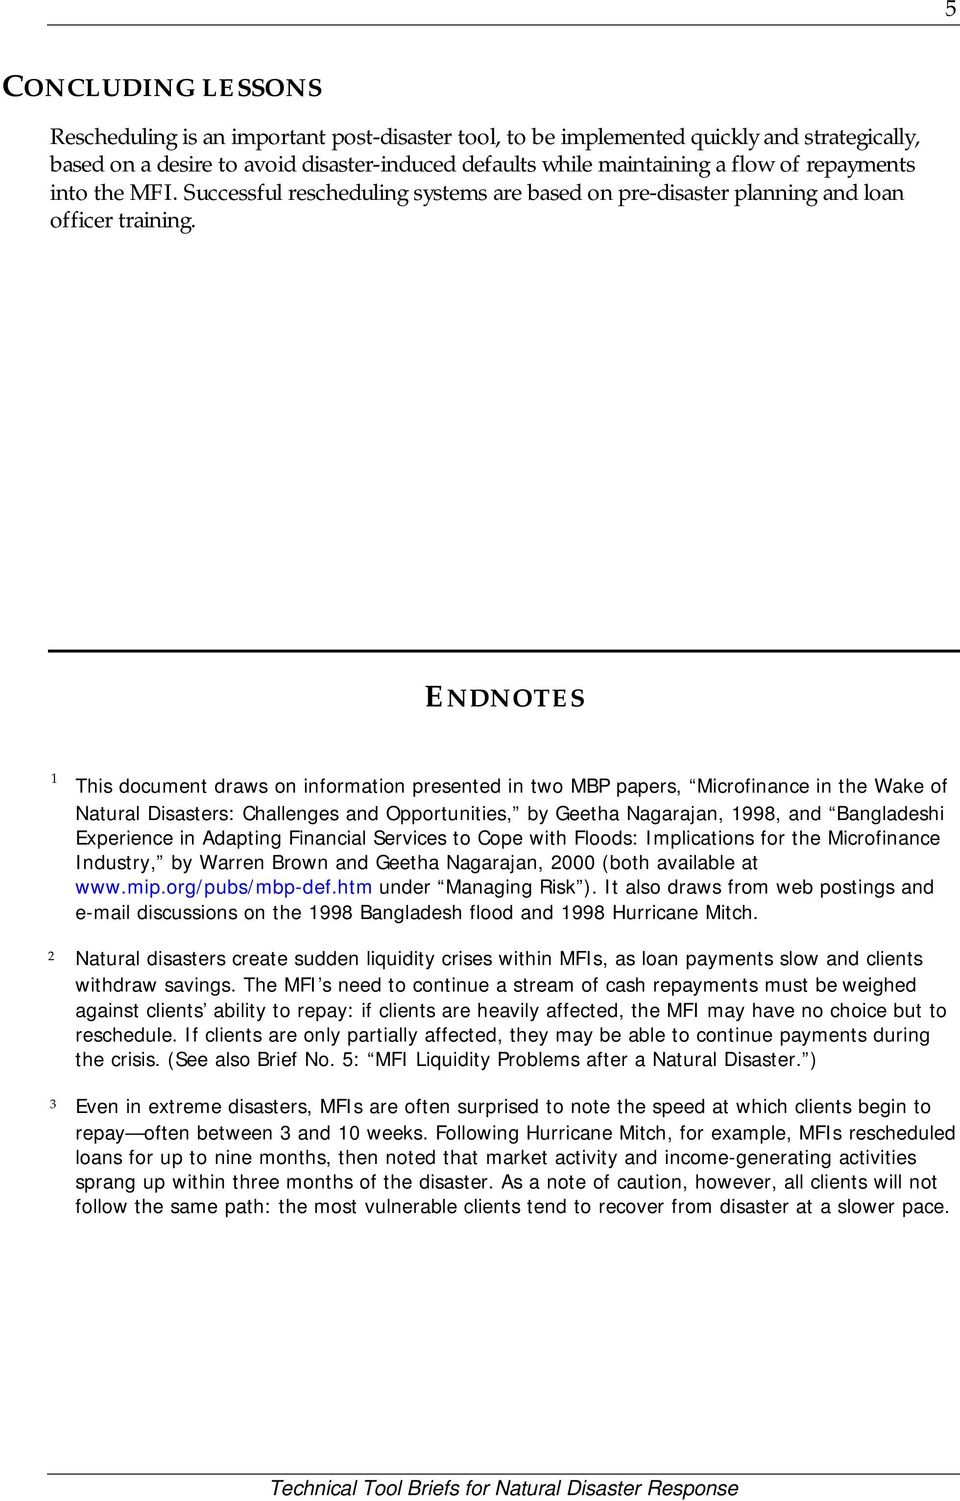 ENDNOTES 1 This document draws on information presented in two MBP papers, Microfinance in the Wake of Natural Disasters: Challenges and Opportunities, by Geetha Nagarajan, 1998, and Bangladeshi